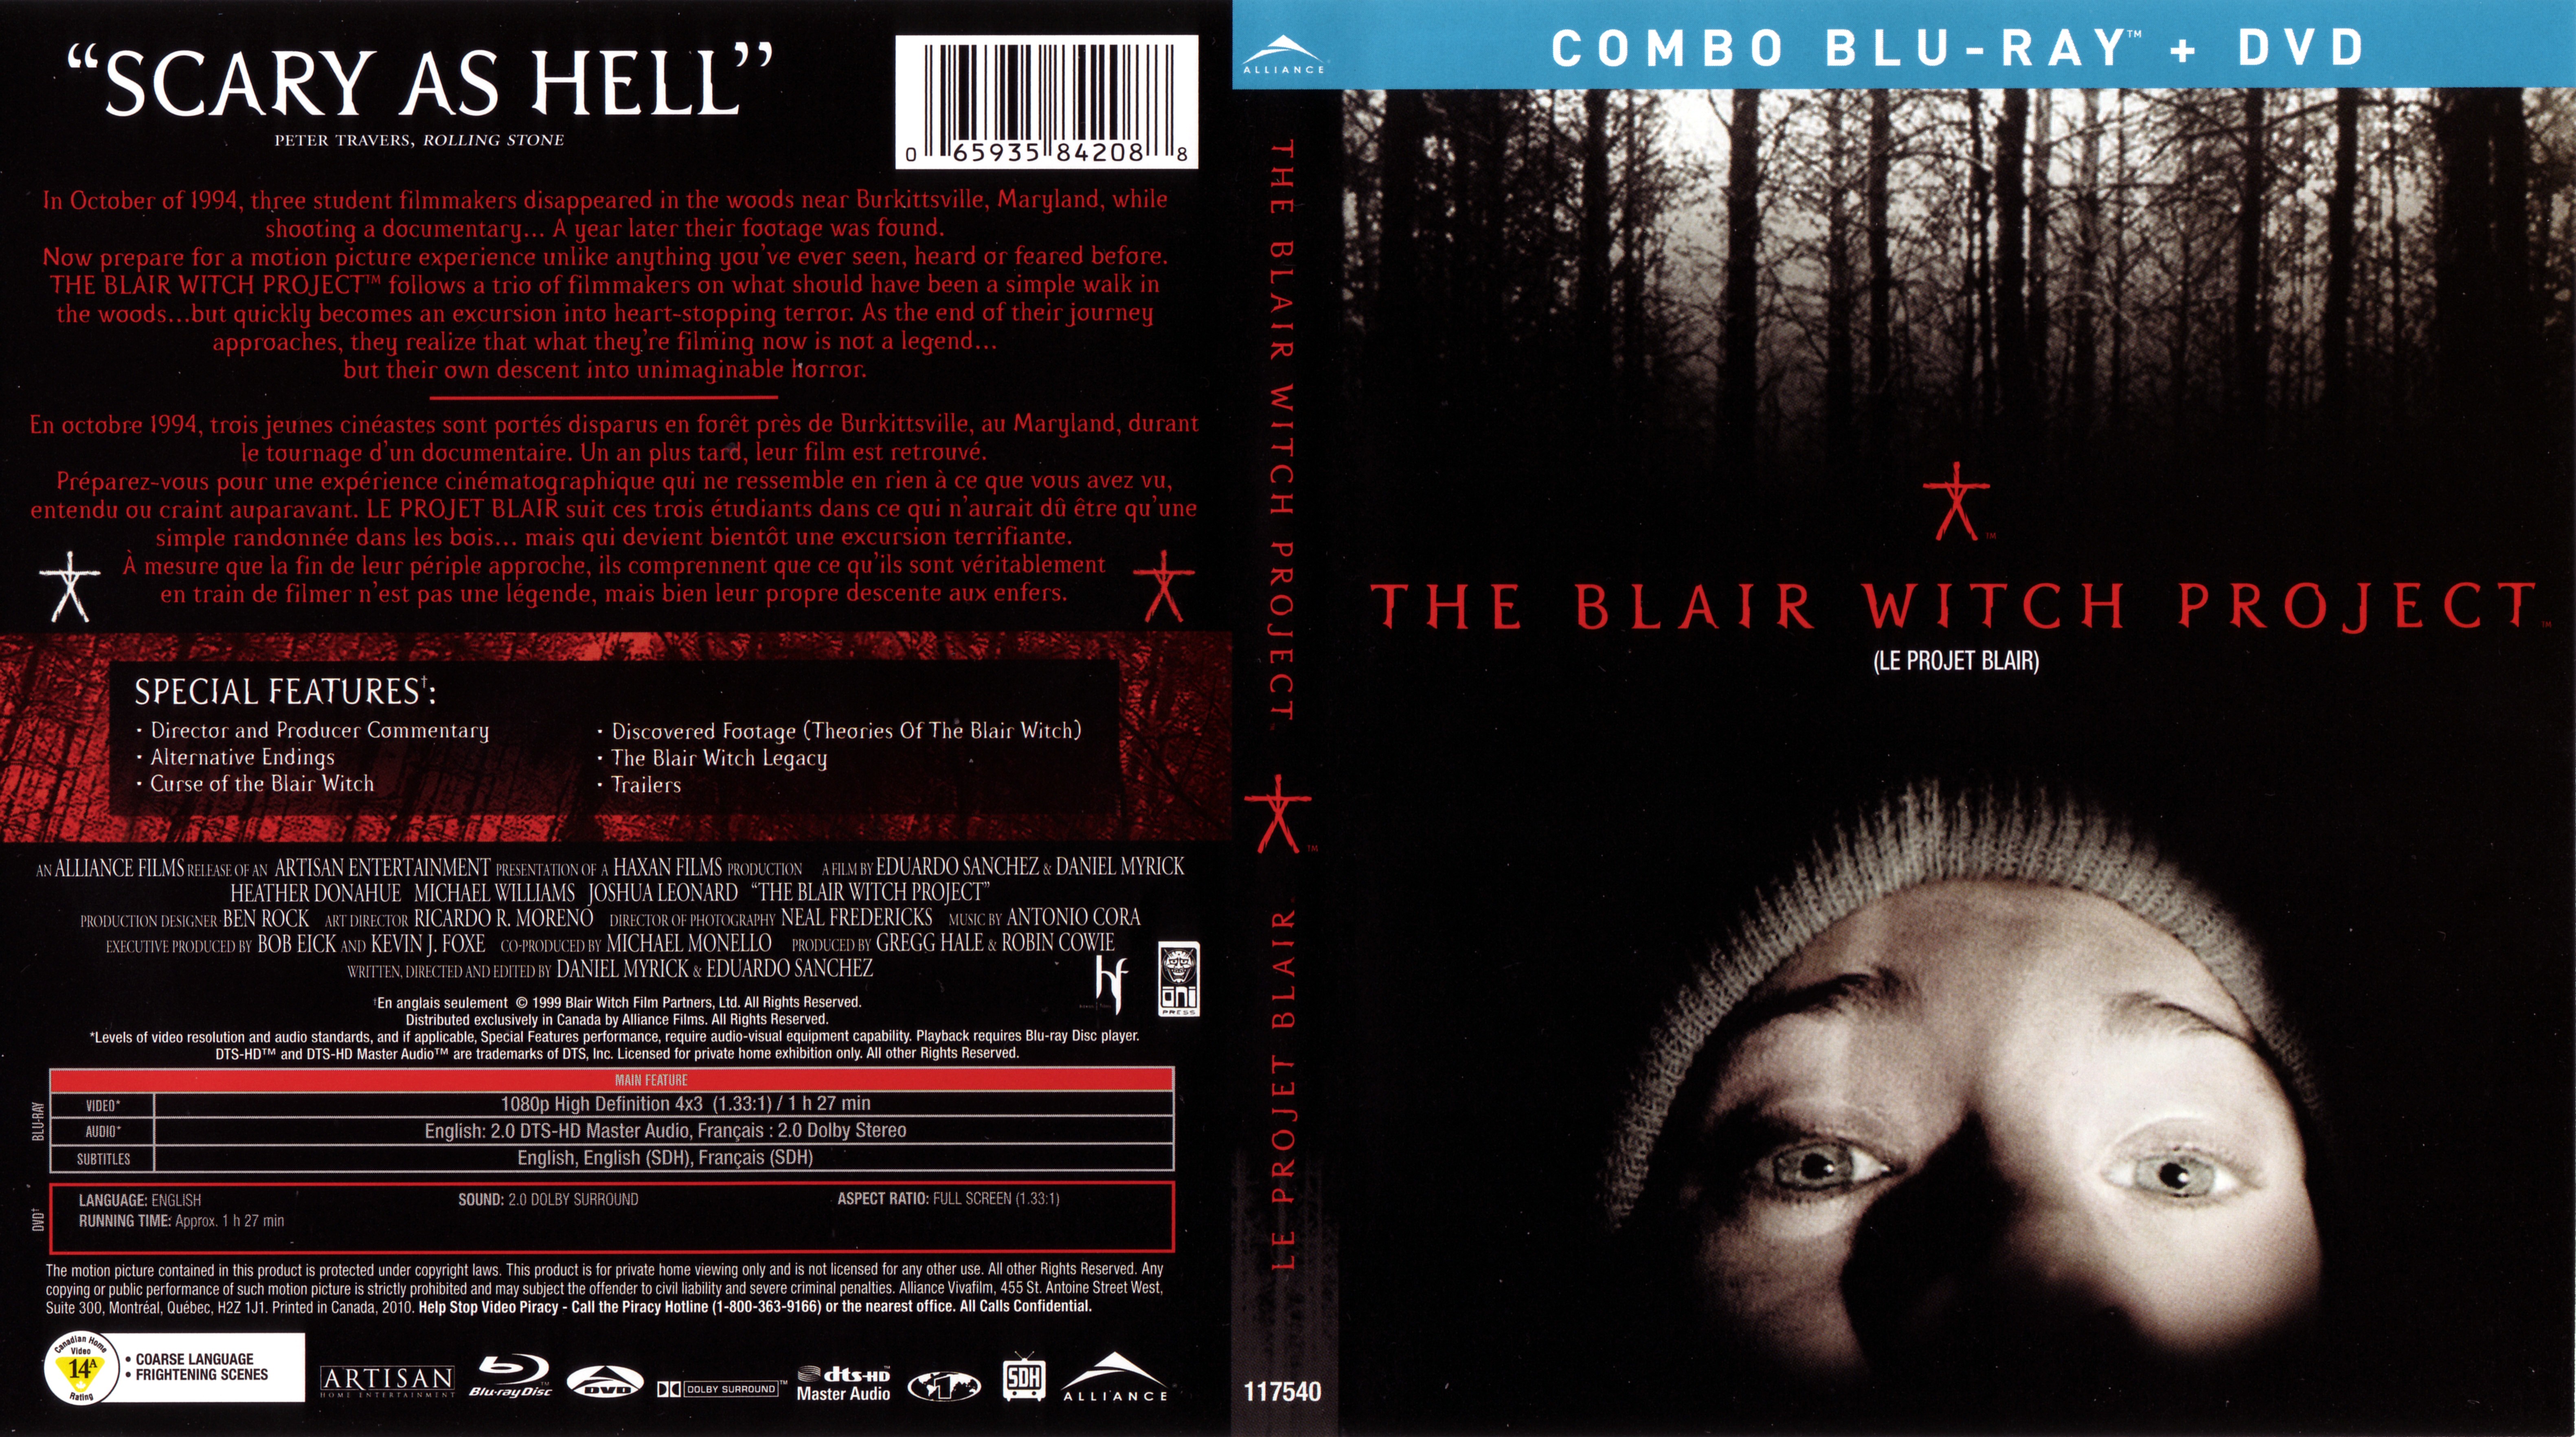 Jaquette DVD Le projet blair witch - The Blair Witch Project (Canadienne) (BLU-RAY) v2